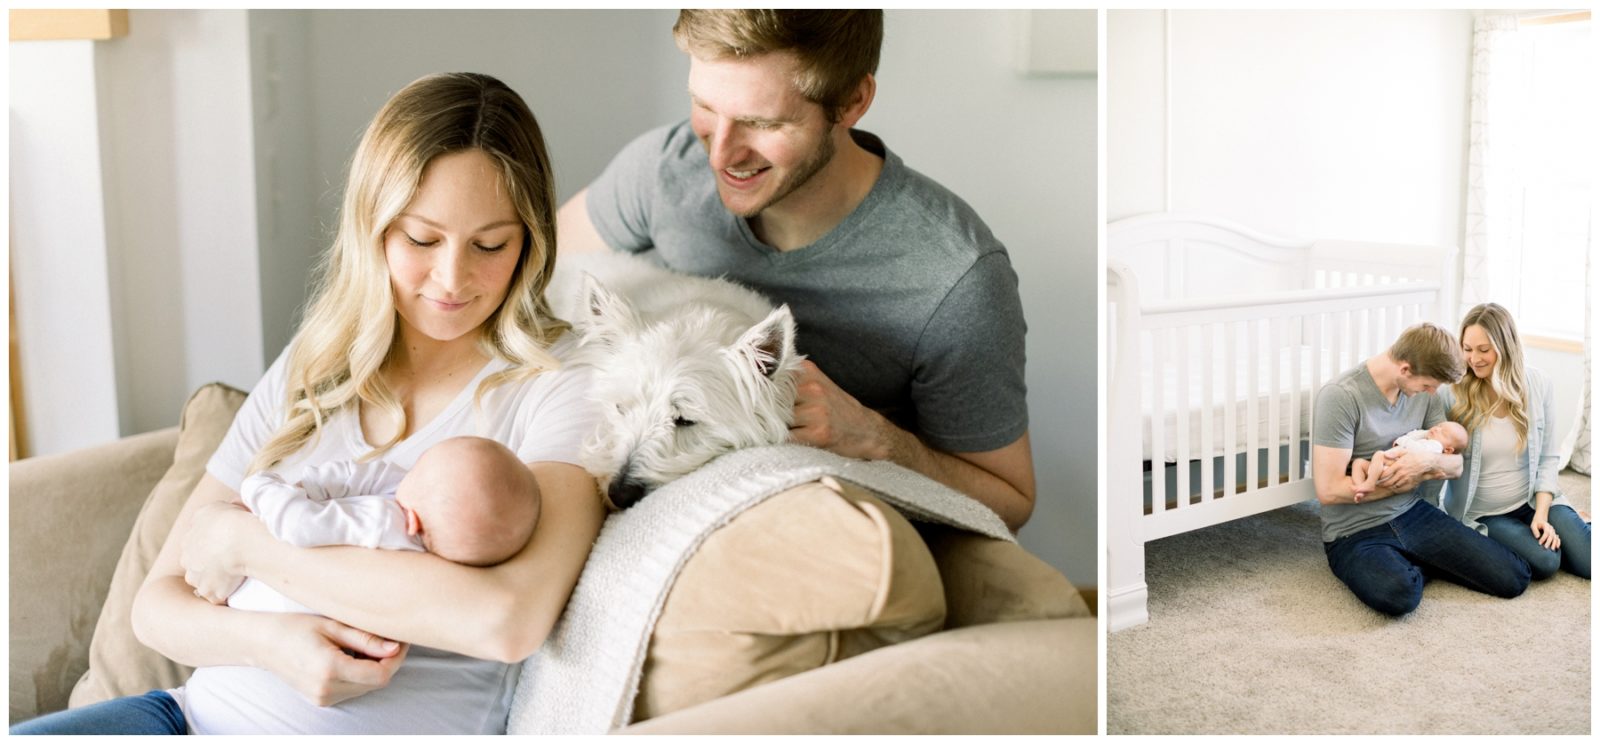 Two pictures. The first one has a man, a woman holding a baby and a dog. The second picture shows a man holding a baby and a woman by his side.